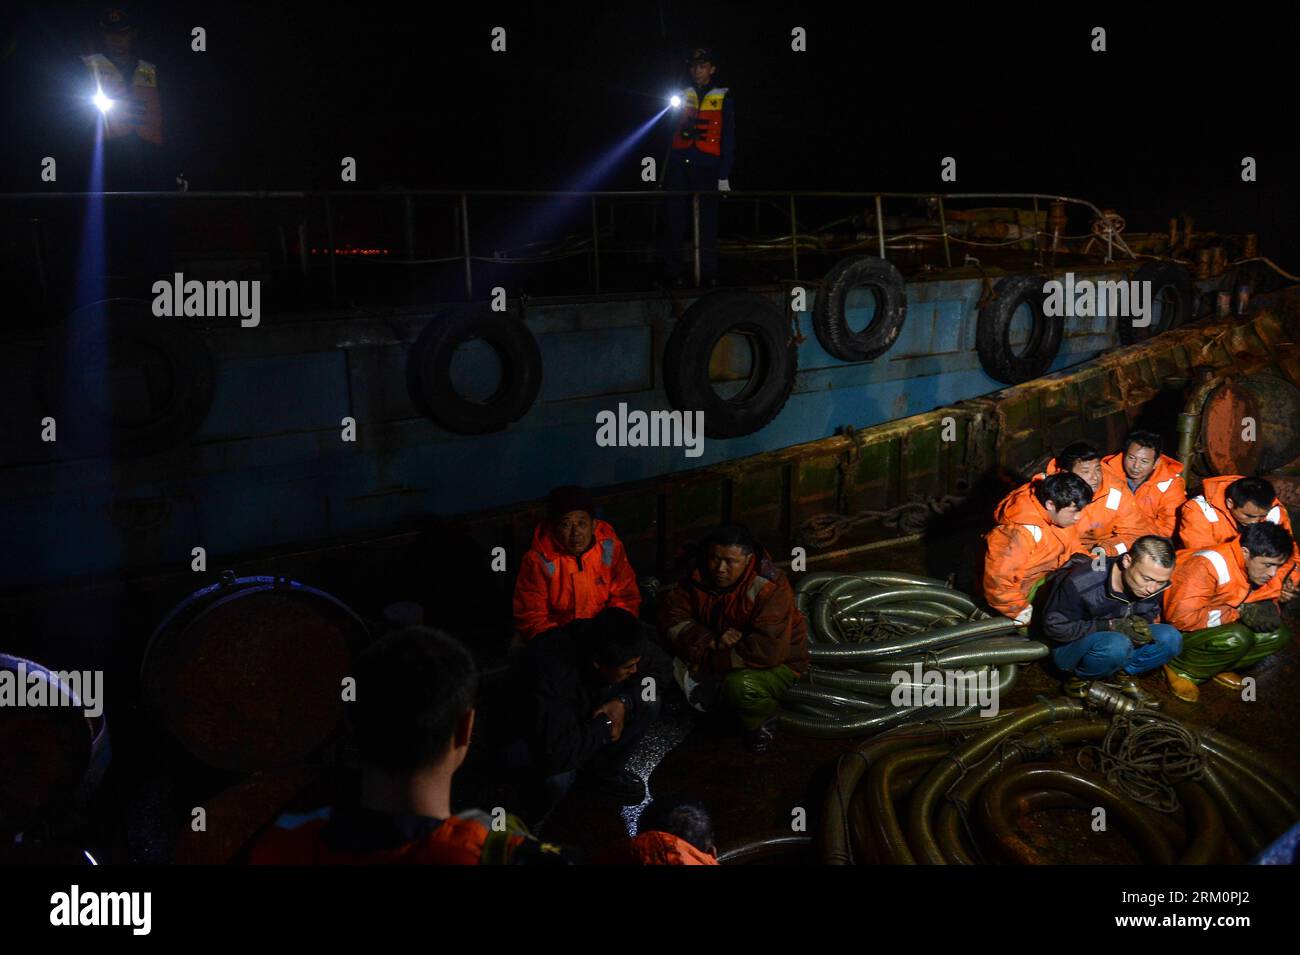 Bildnummer: 59463486  Datum: 29.03.2013  Copyright: imago/Xinhua Photo taken on March 29, 2013 shows police watching over smugglers on a boat offshore east China s Zhejiang Province. A gangs smuggling case involving 15,000 tons of refined oil worthy over 100 million Yuan (approximately 15.9 million U.S. dollars) was seized here on Sunday, as announced by Hangzhou customs on March 31, it is the biggest ever gangs smuggling case offshore Zhejiang province. (Xinhua/Xu Yu) (cxy) CHINA-ZHEJIANG-GANGS SMUGGLING CASE (CN) PUBLICATIONxNOTxINxCHN Gesellschaft Wirtschaft Kriminalität Öl Ölschmuggel Schm Stock Photo